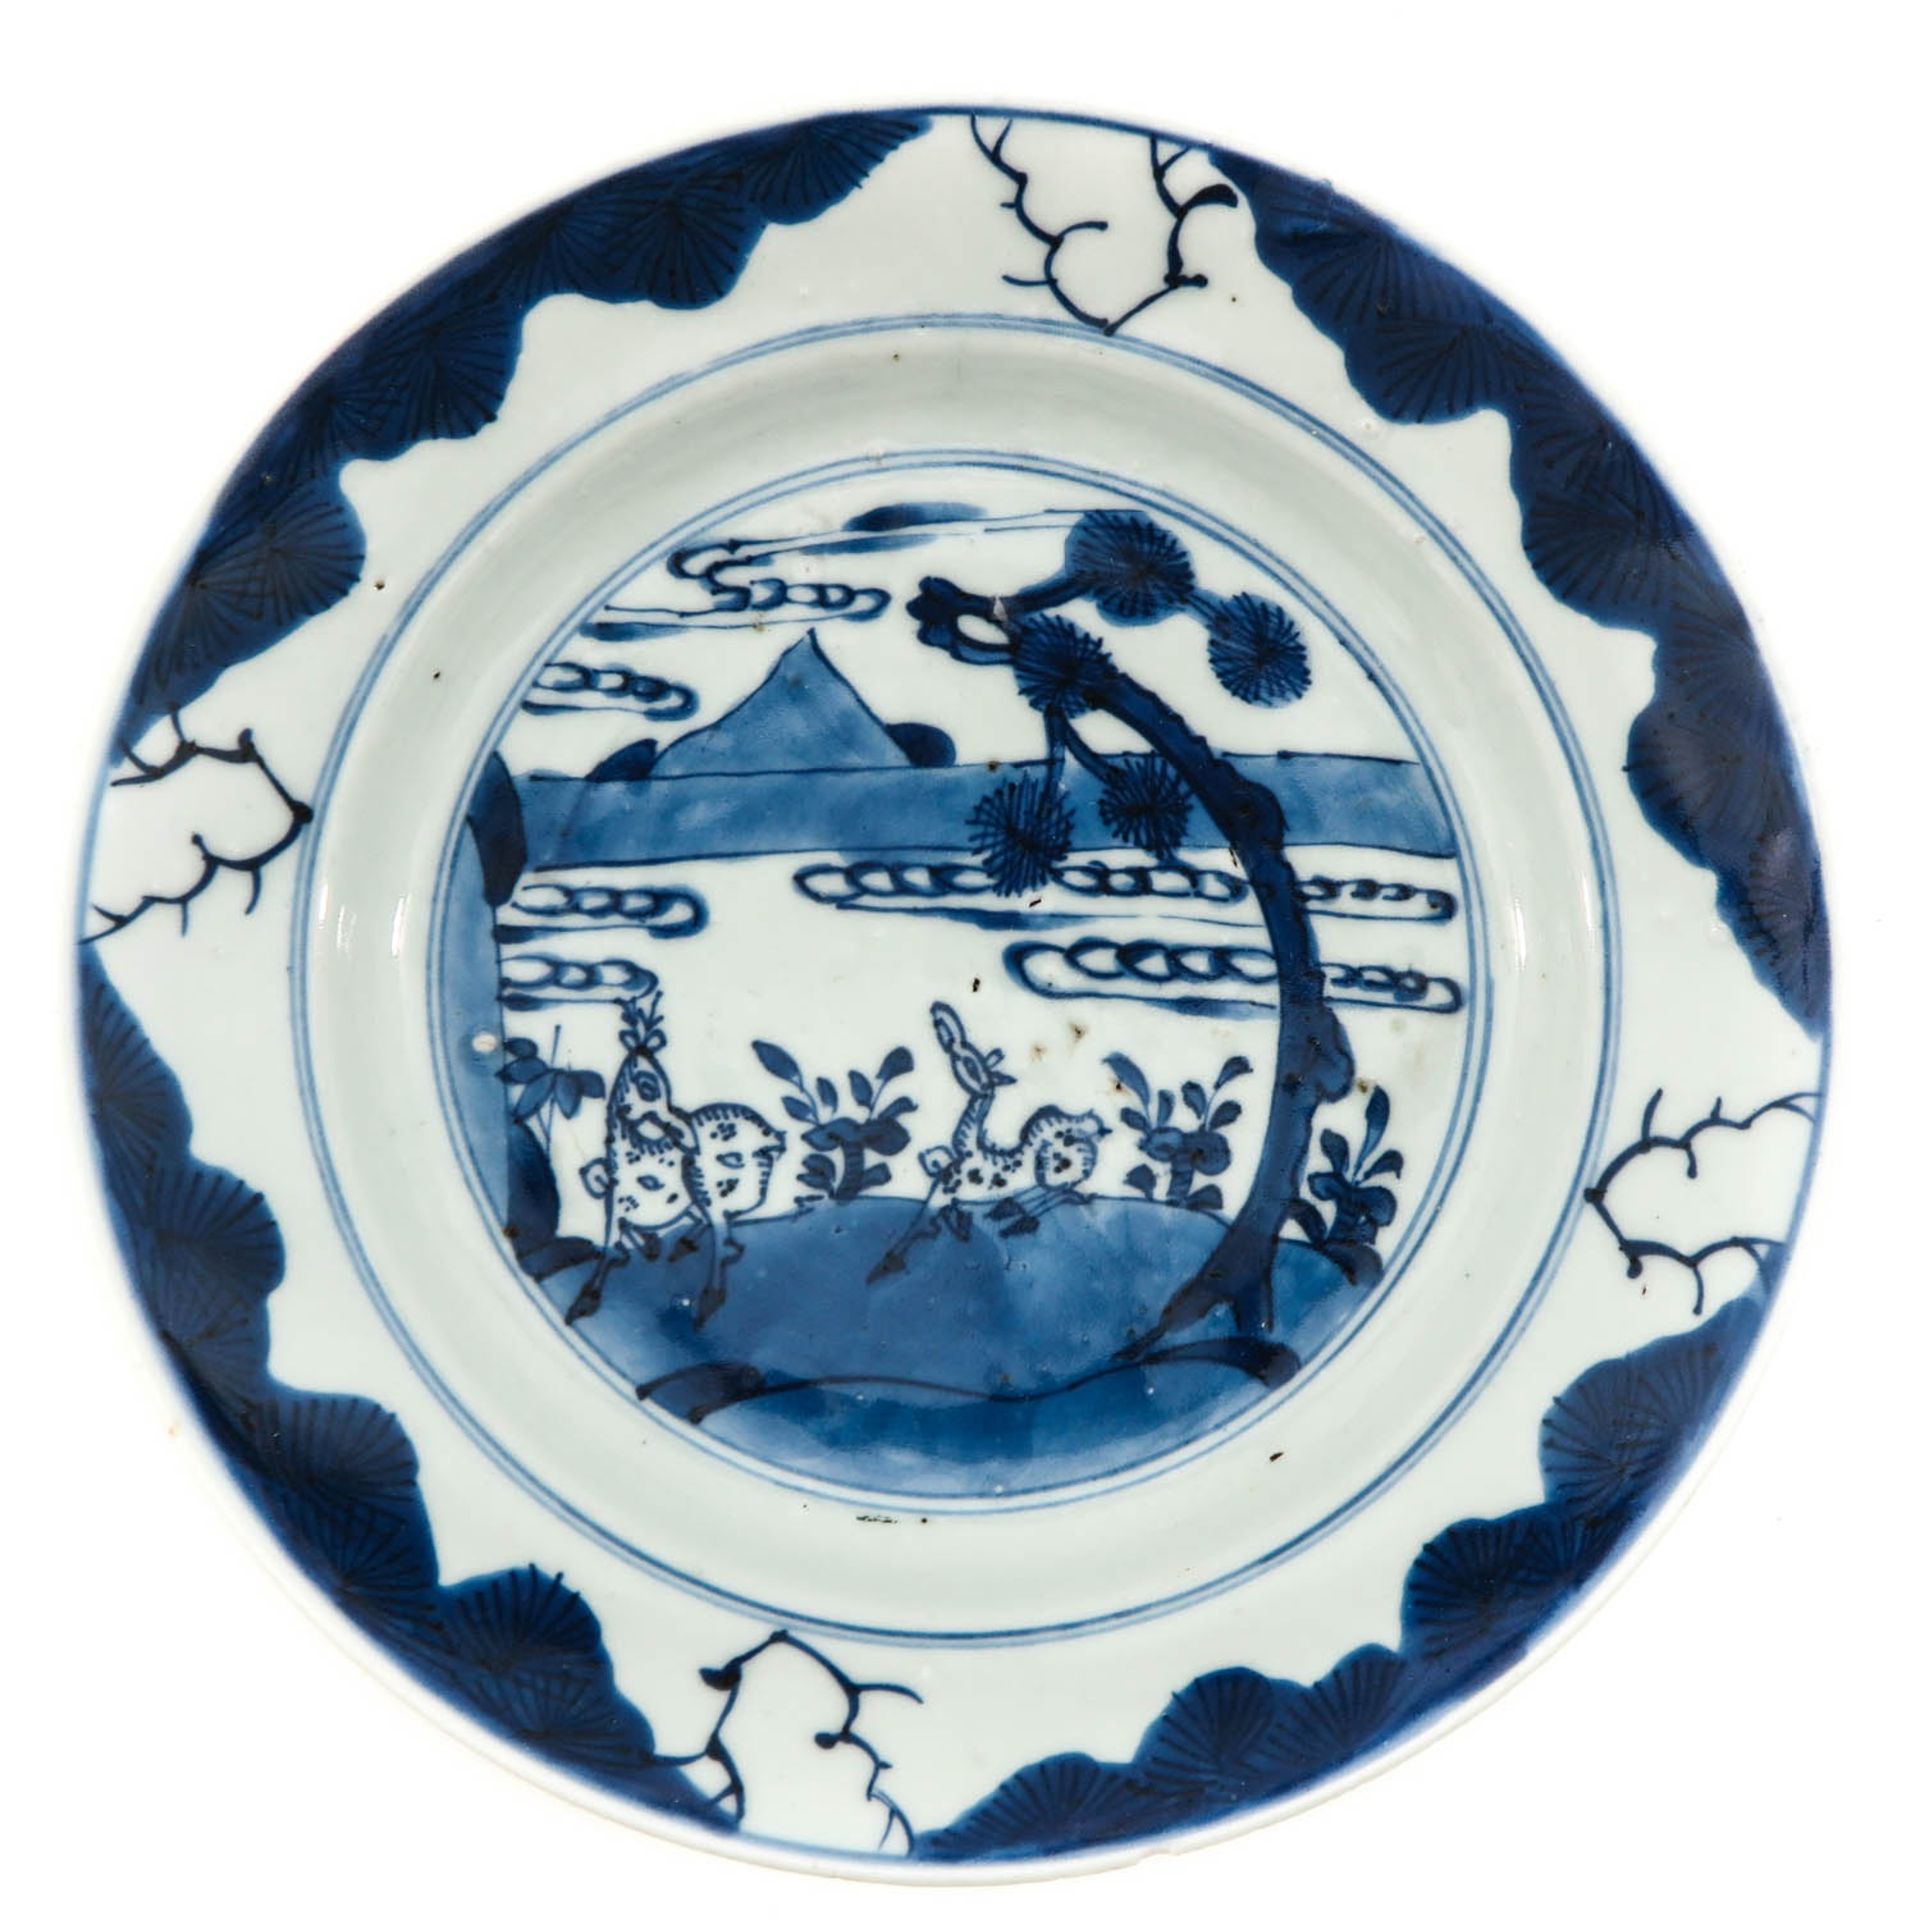 A Pair of Blue and White Plates - Image 3 of 10